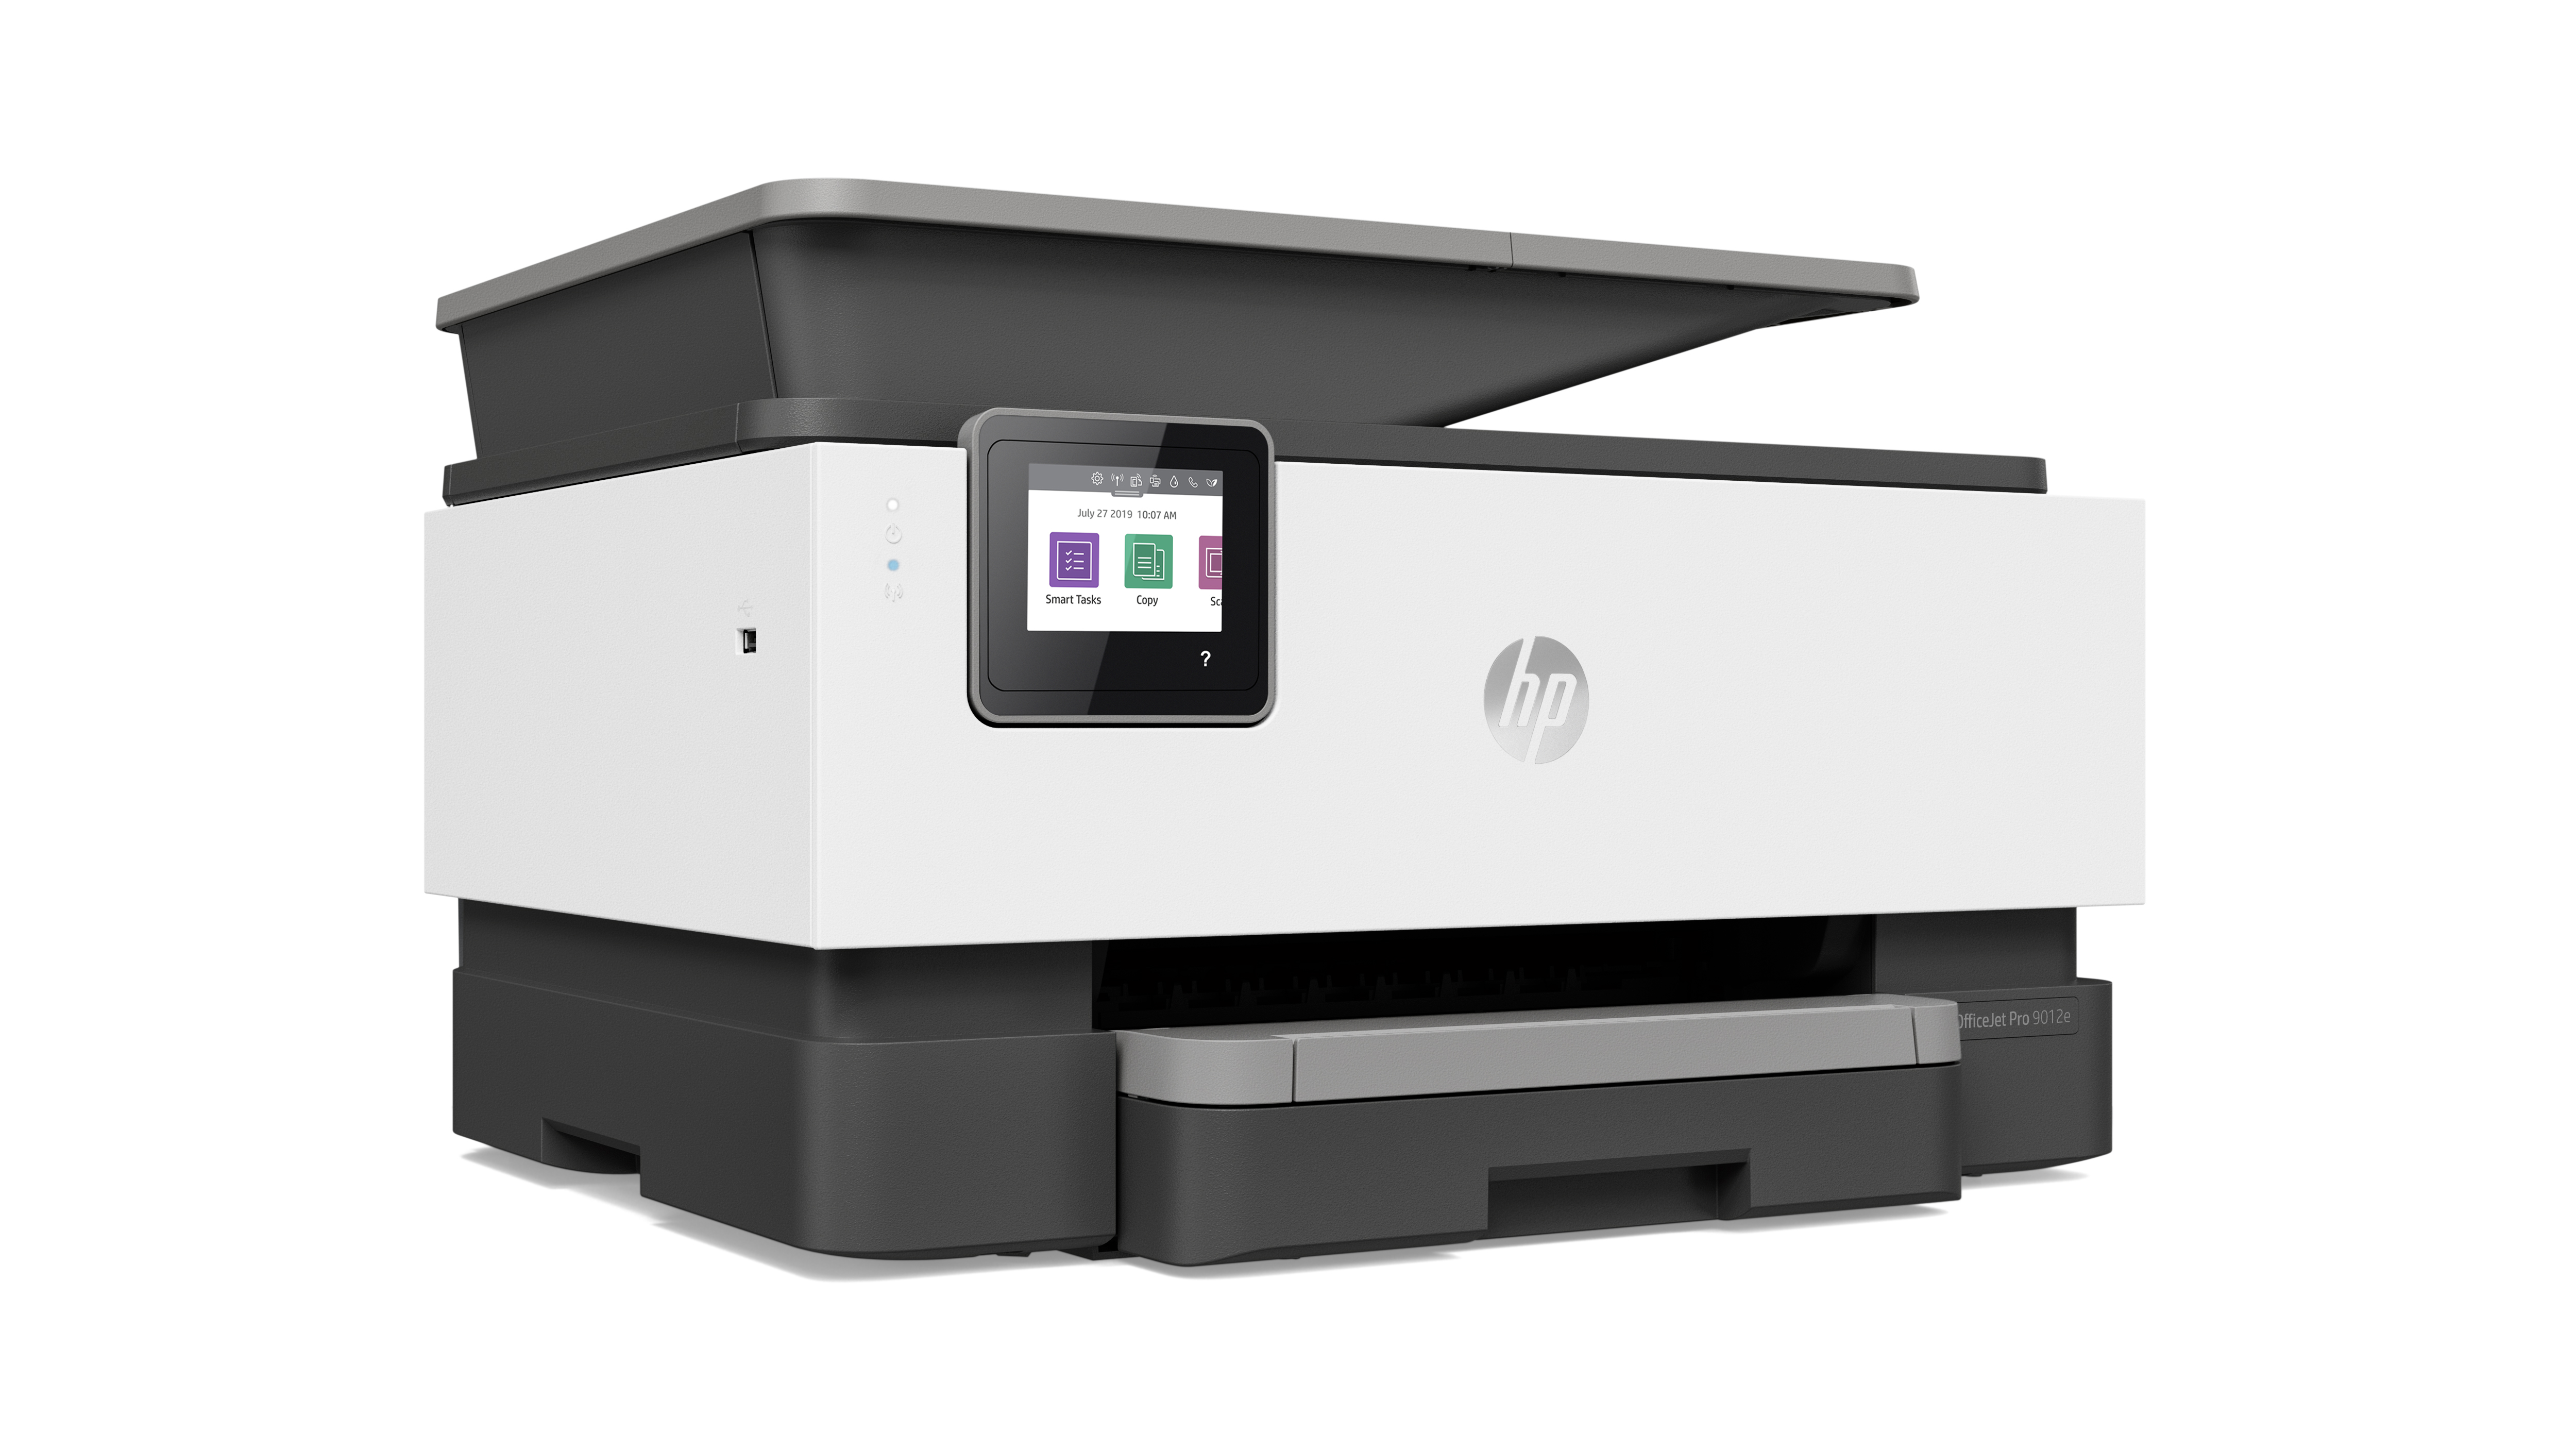 Unboxing & Installation HP Office Jet Pro 8022e